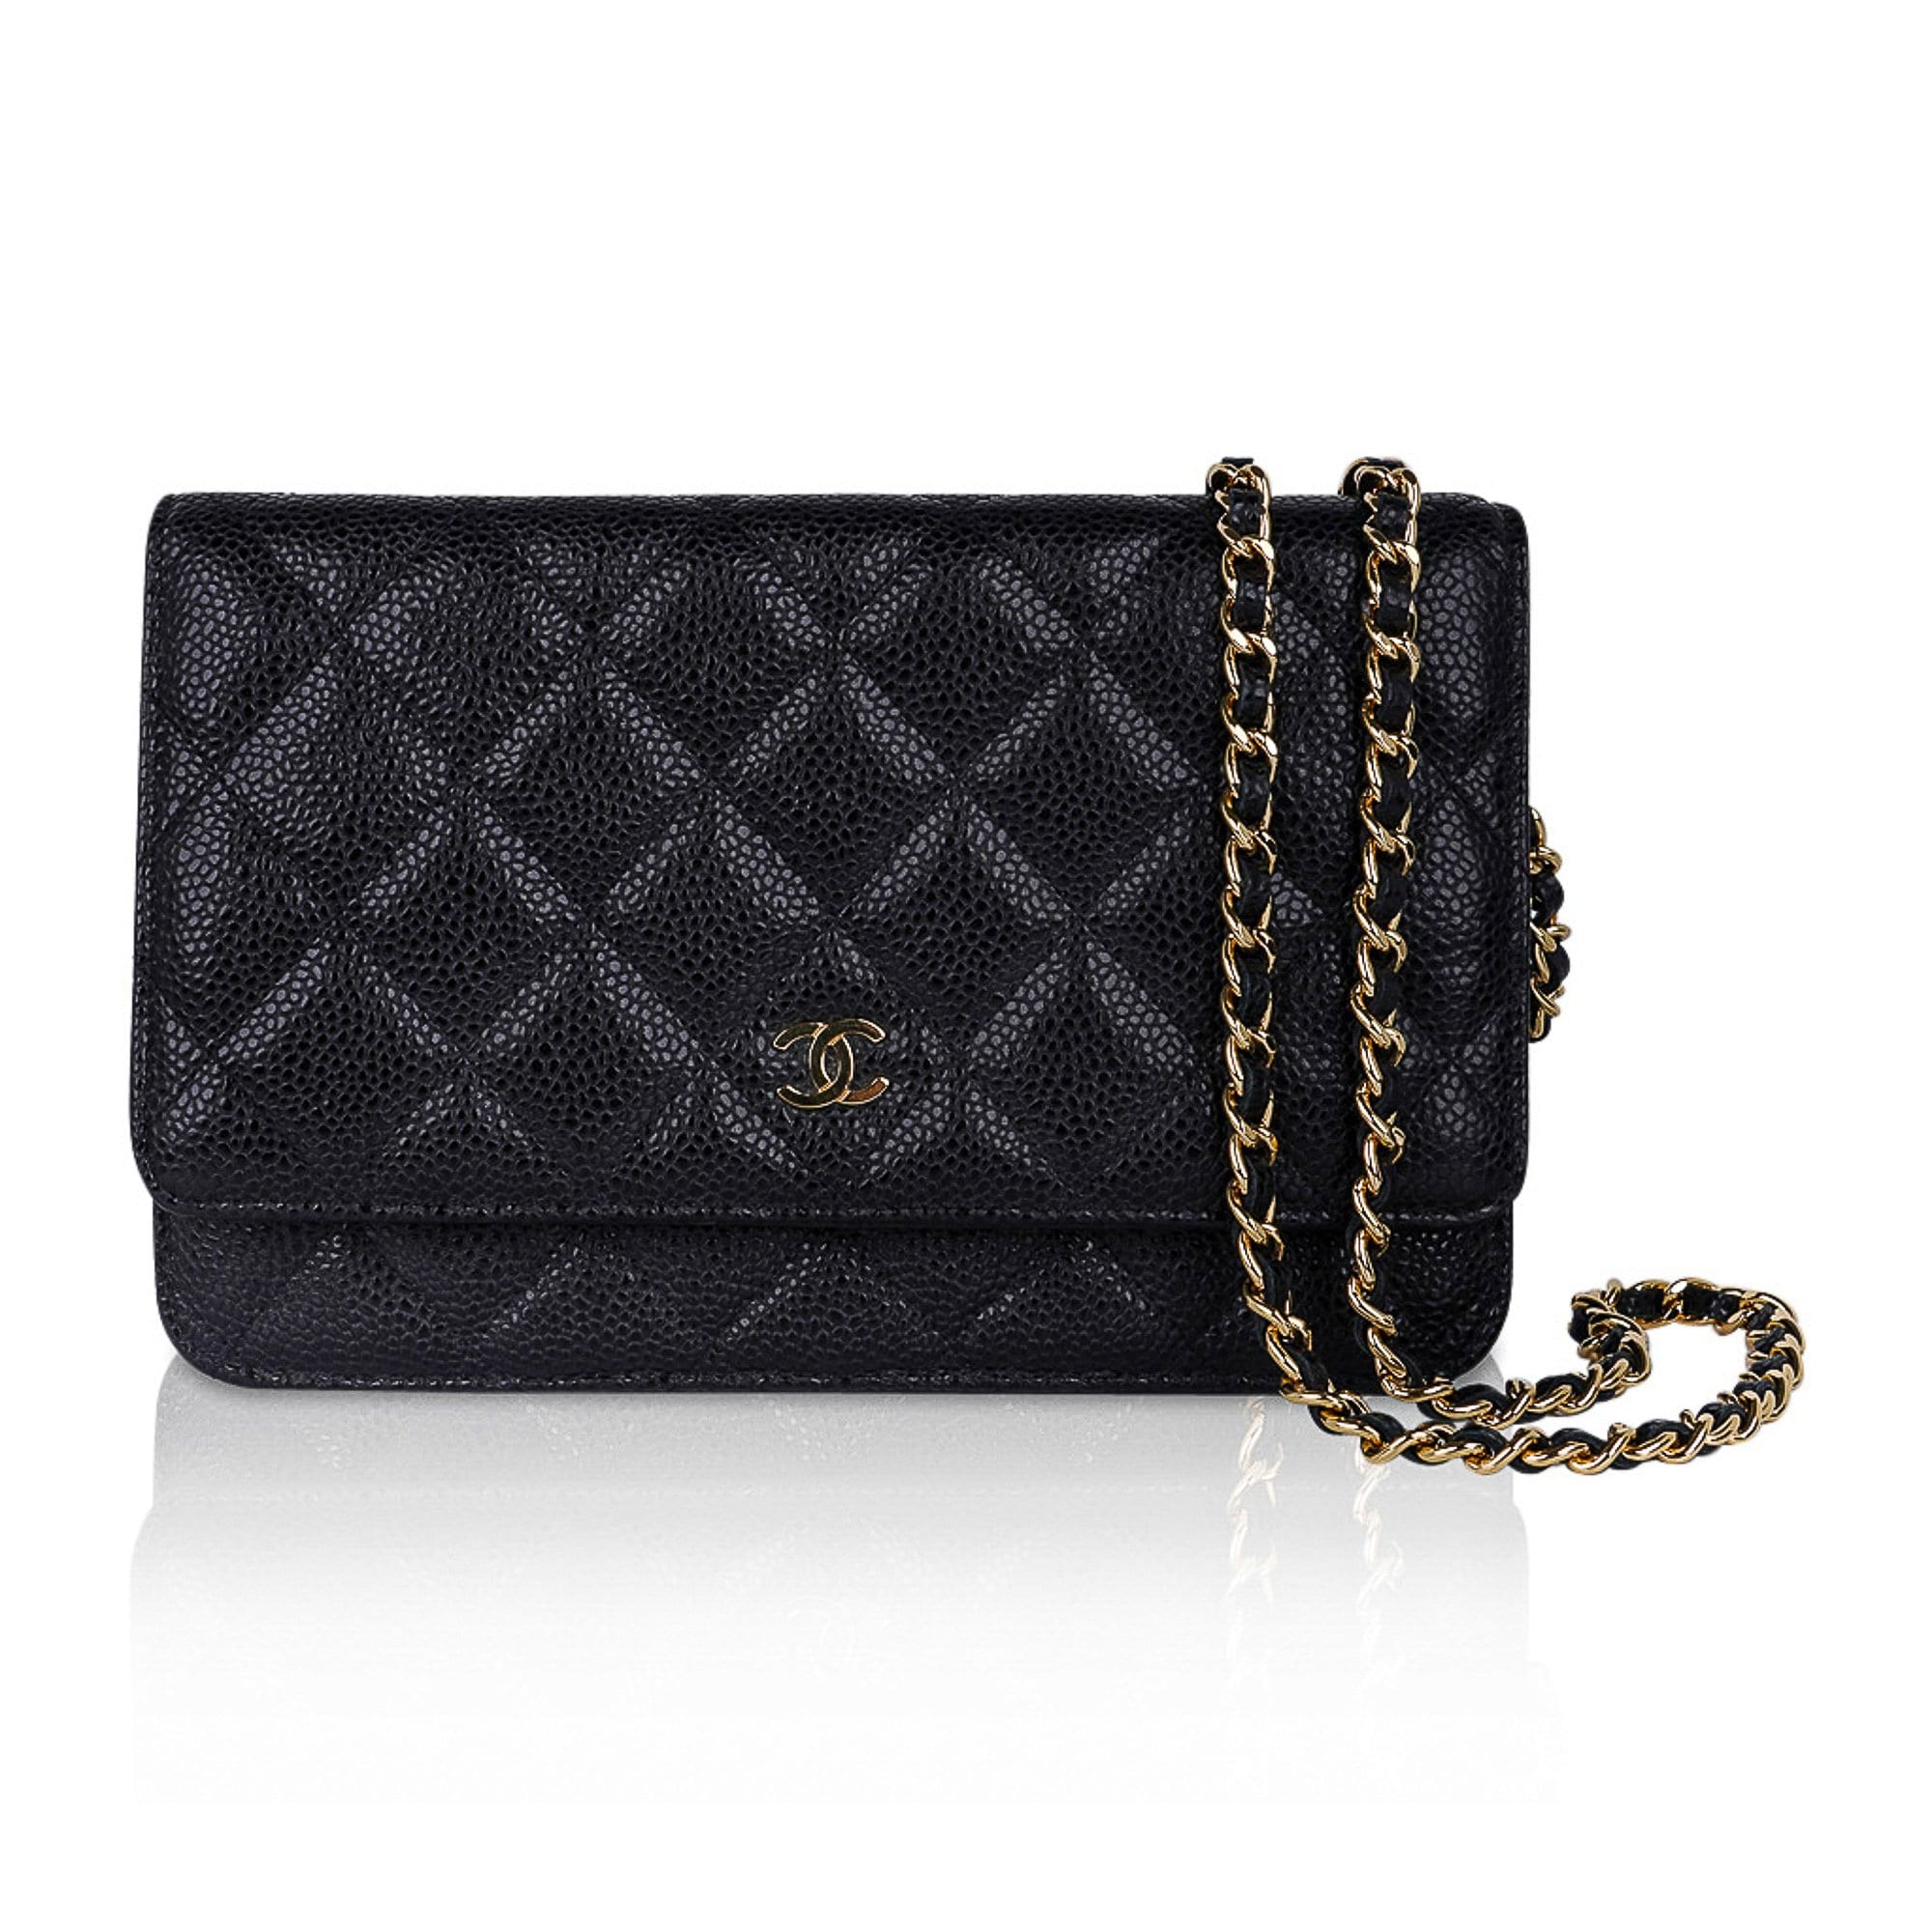 wallet on chain chanel black